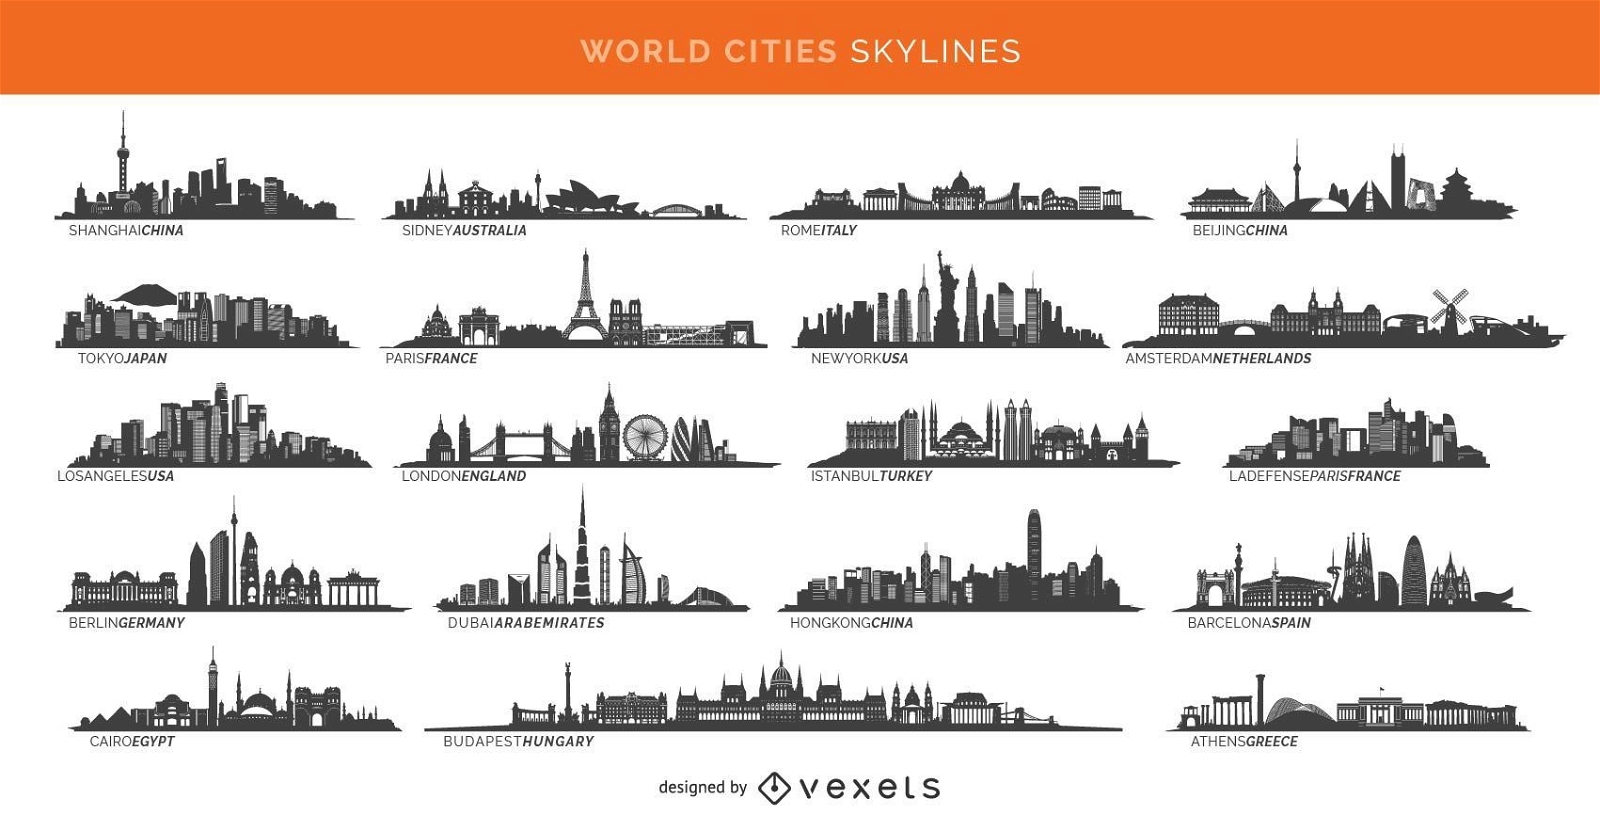 19 famous cities skylines including Paris London Sidney and more